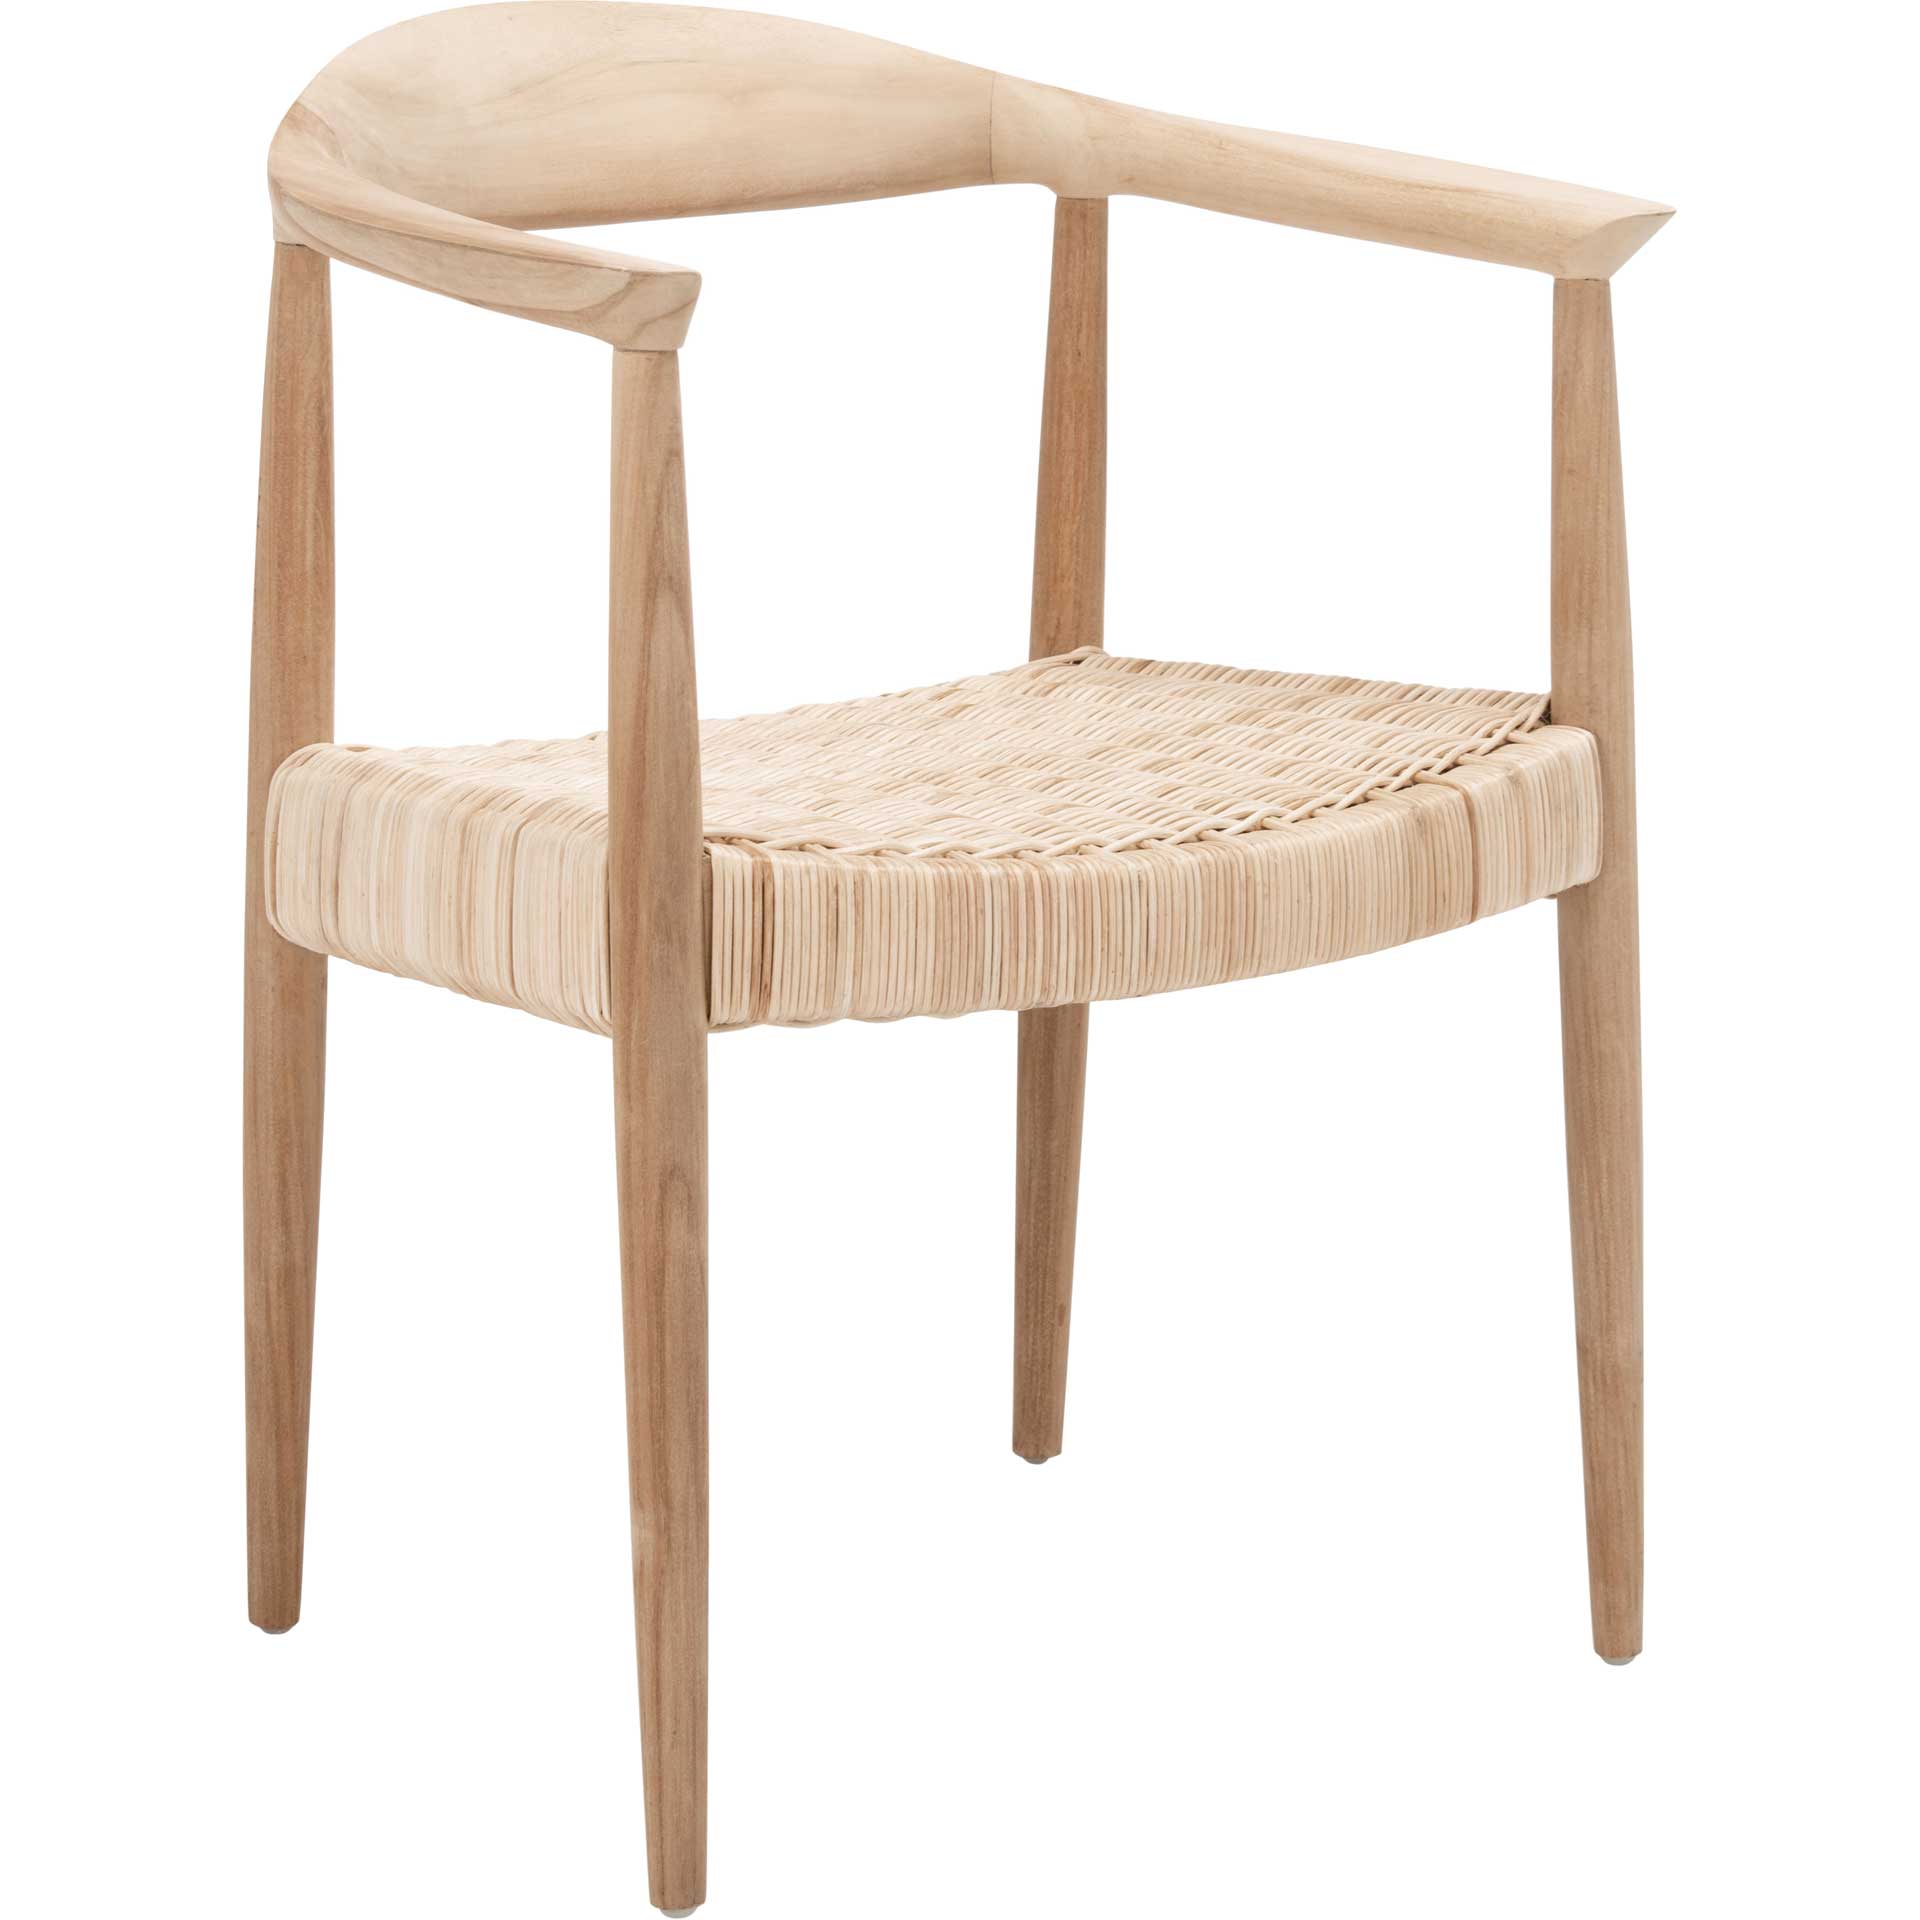 Resa Rope Rattan Accent Chair Natural